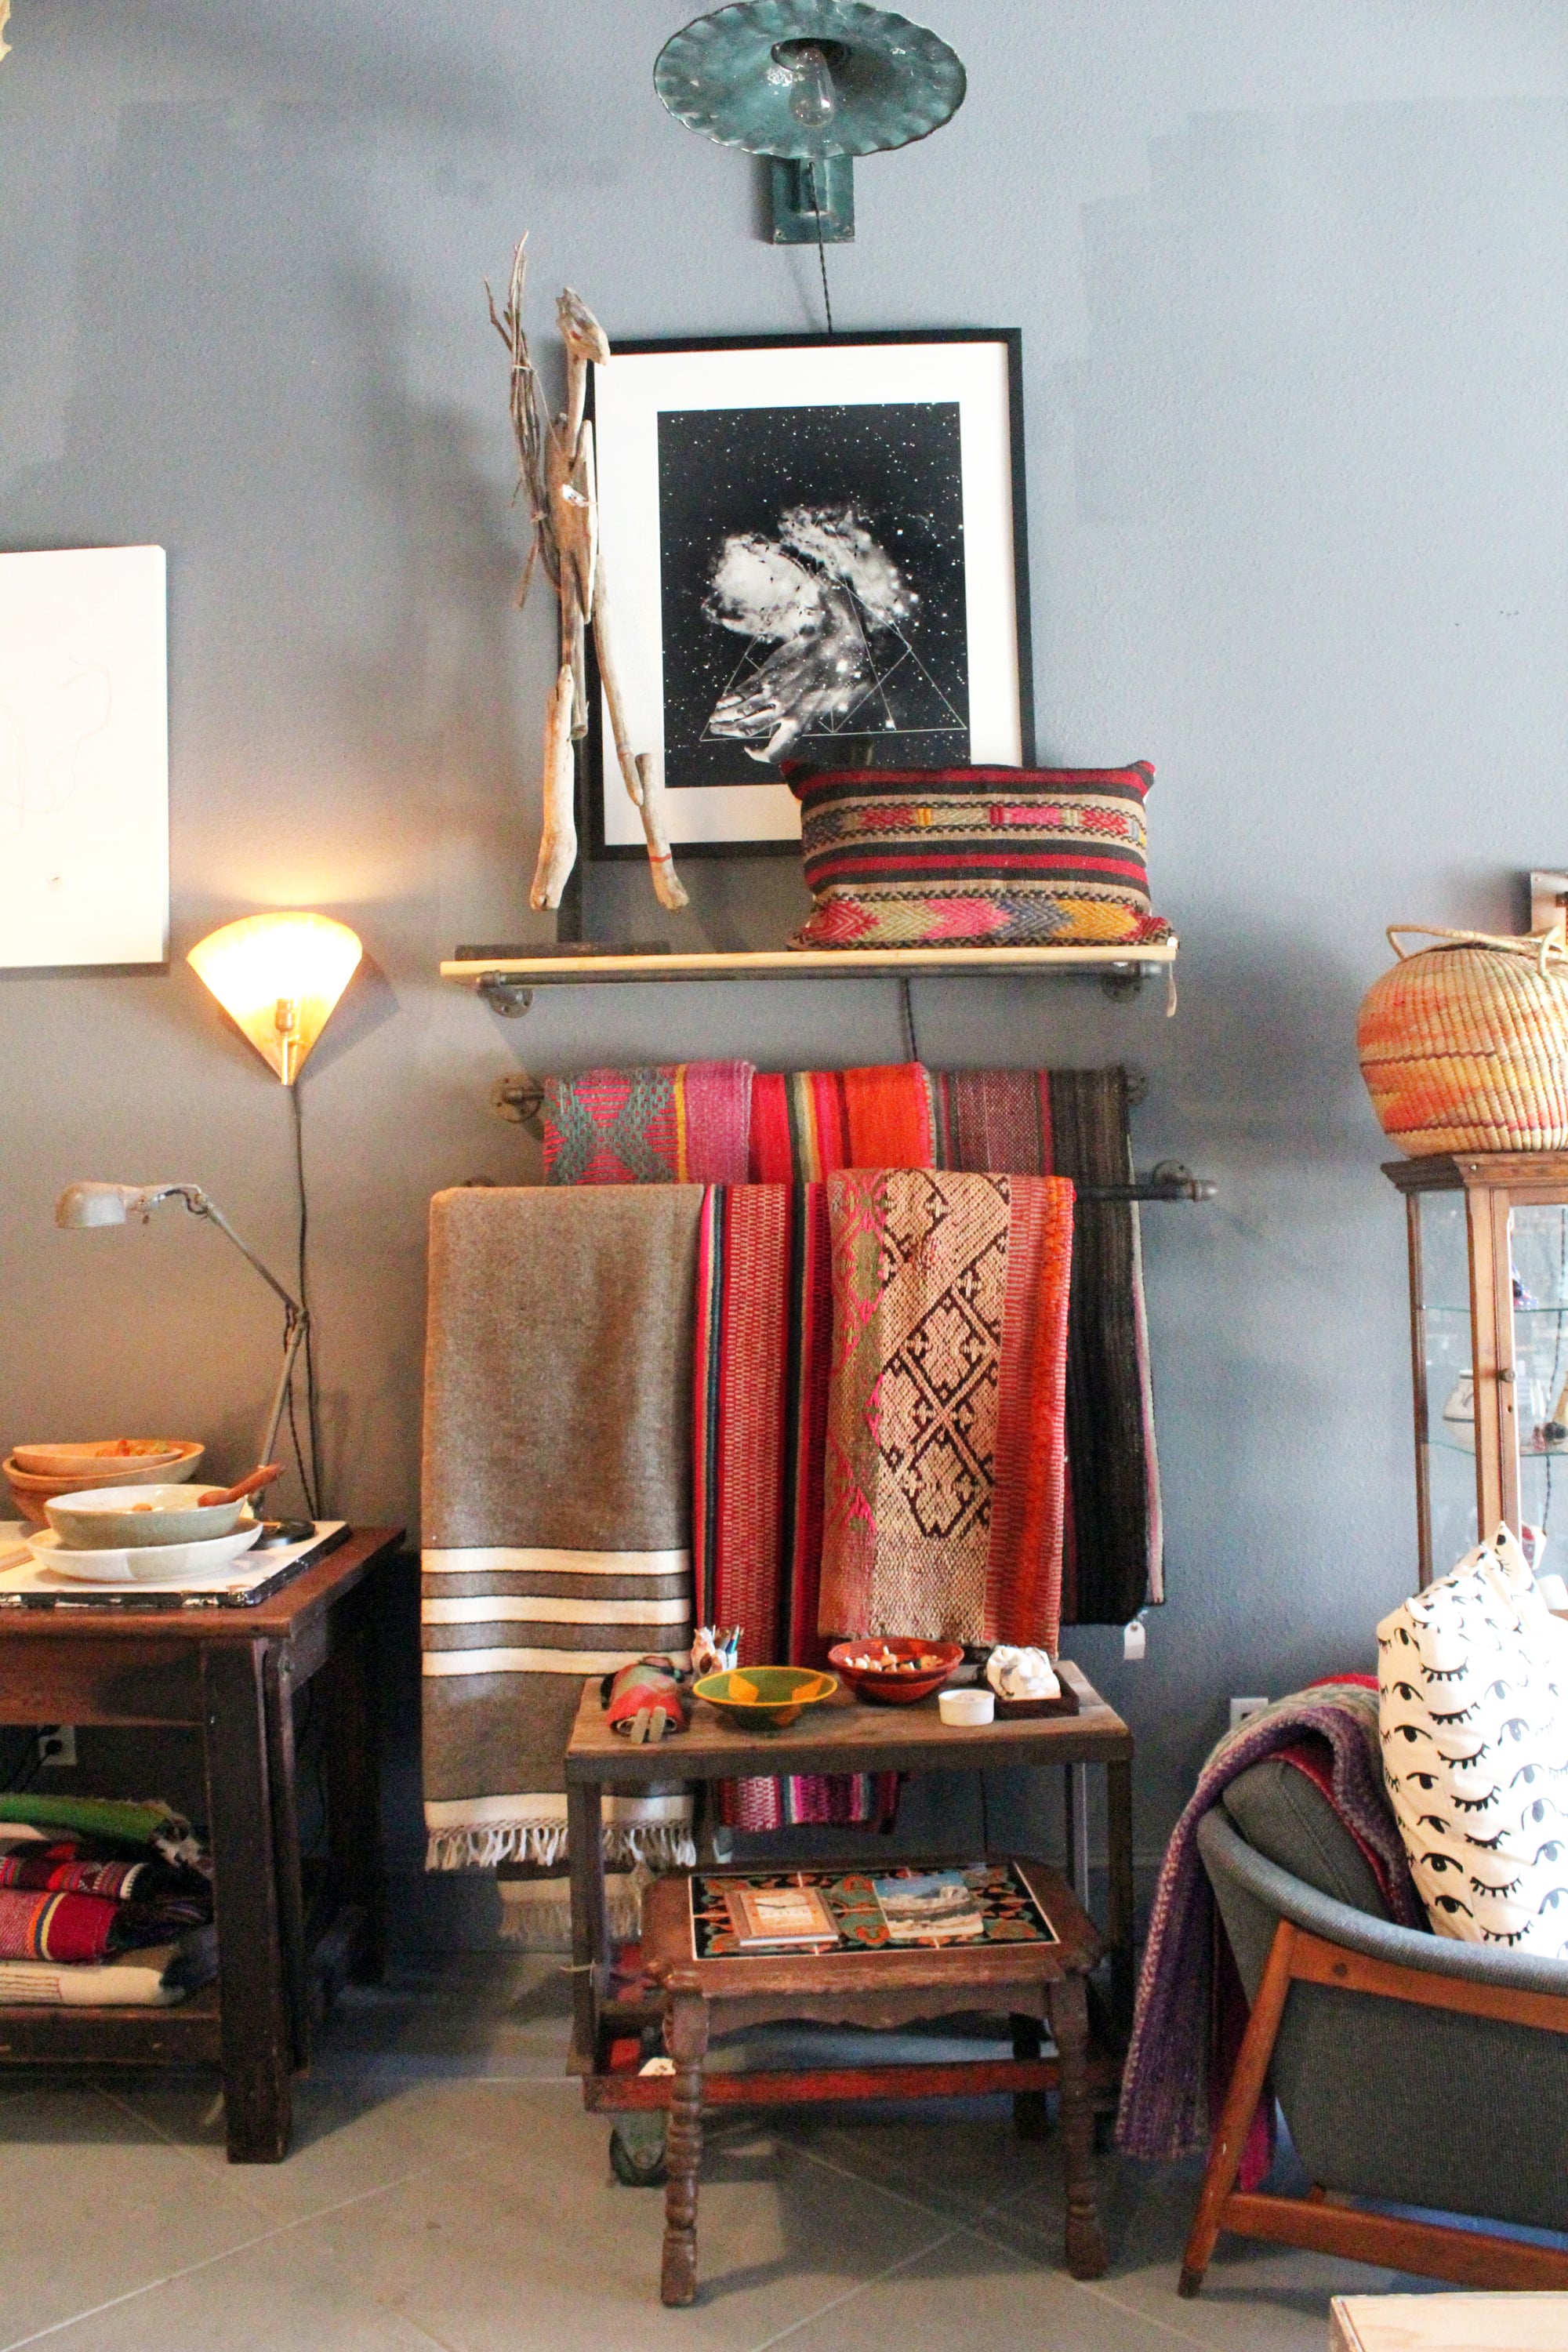 Buying Vintage Home Decor - What To Know - House Of Hipsters